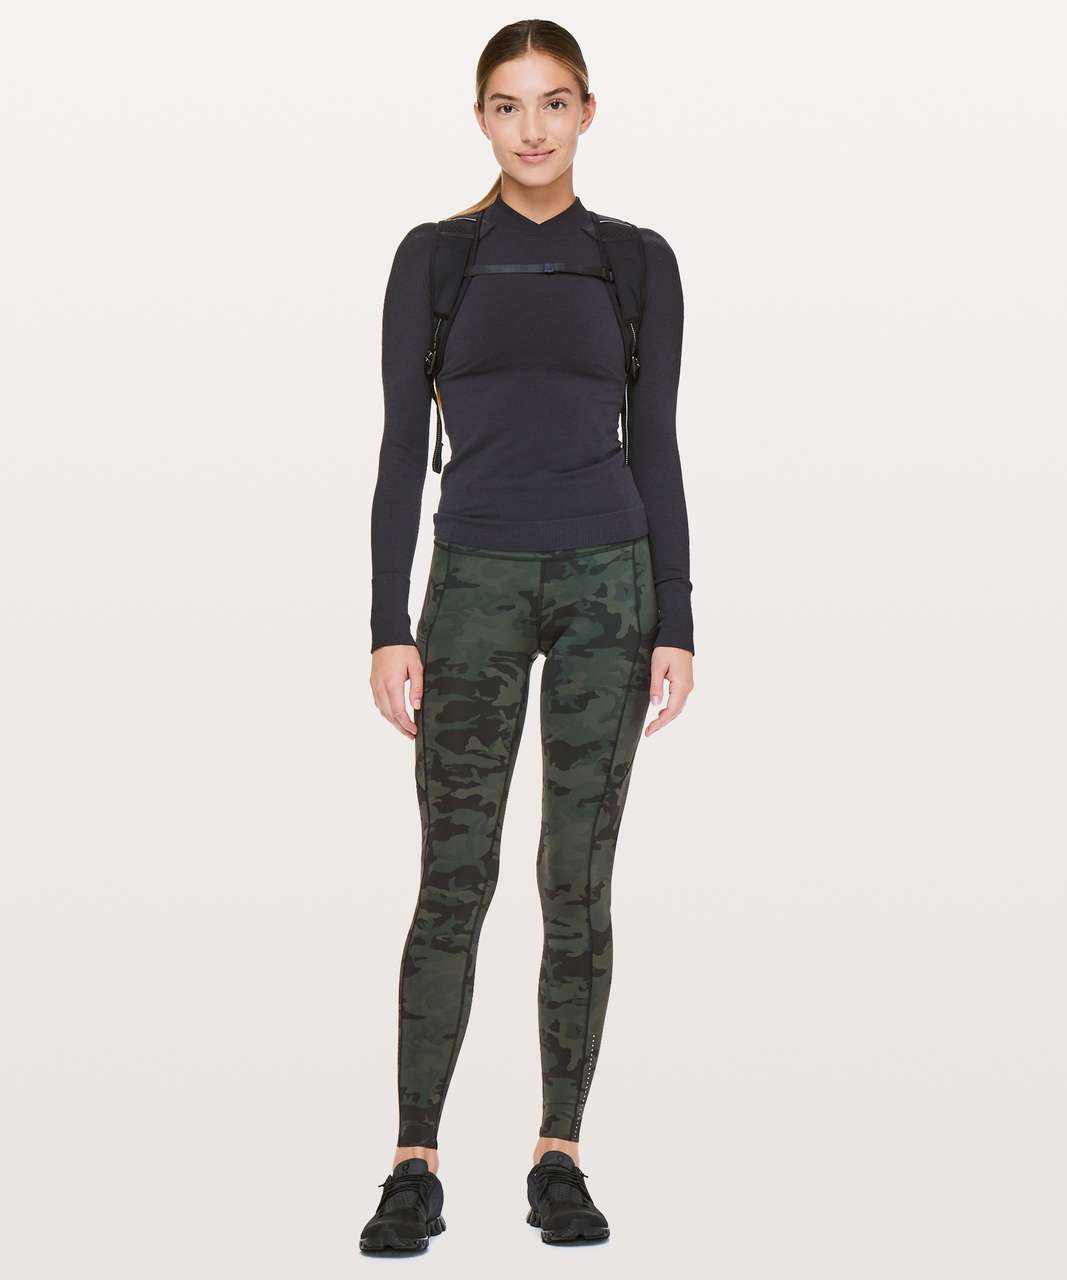 Lululemon Fast & Free Full Length Tight *Nulux 28" - Incognito Camo Multi Gator Green